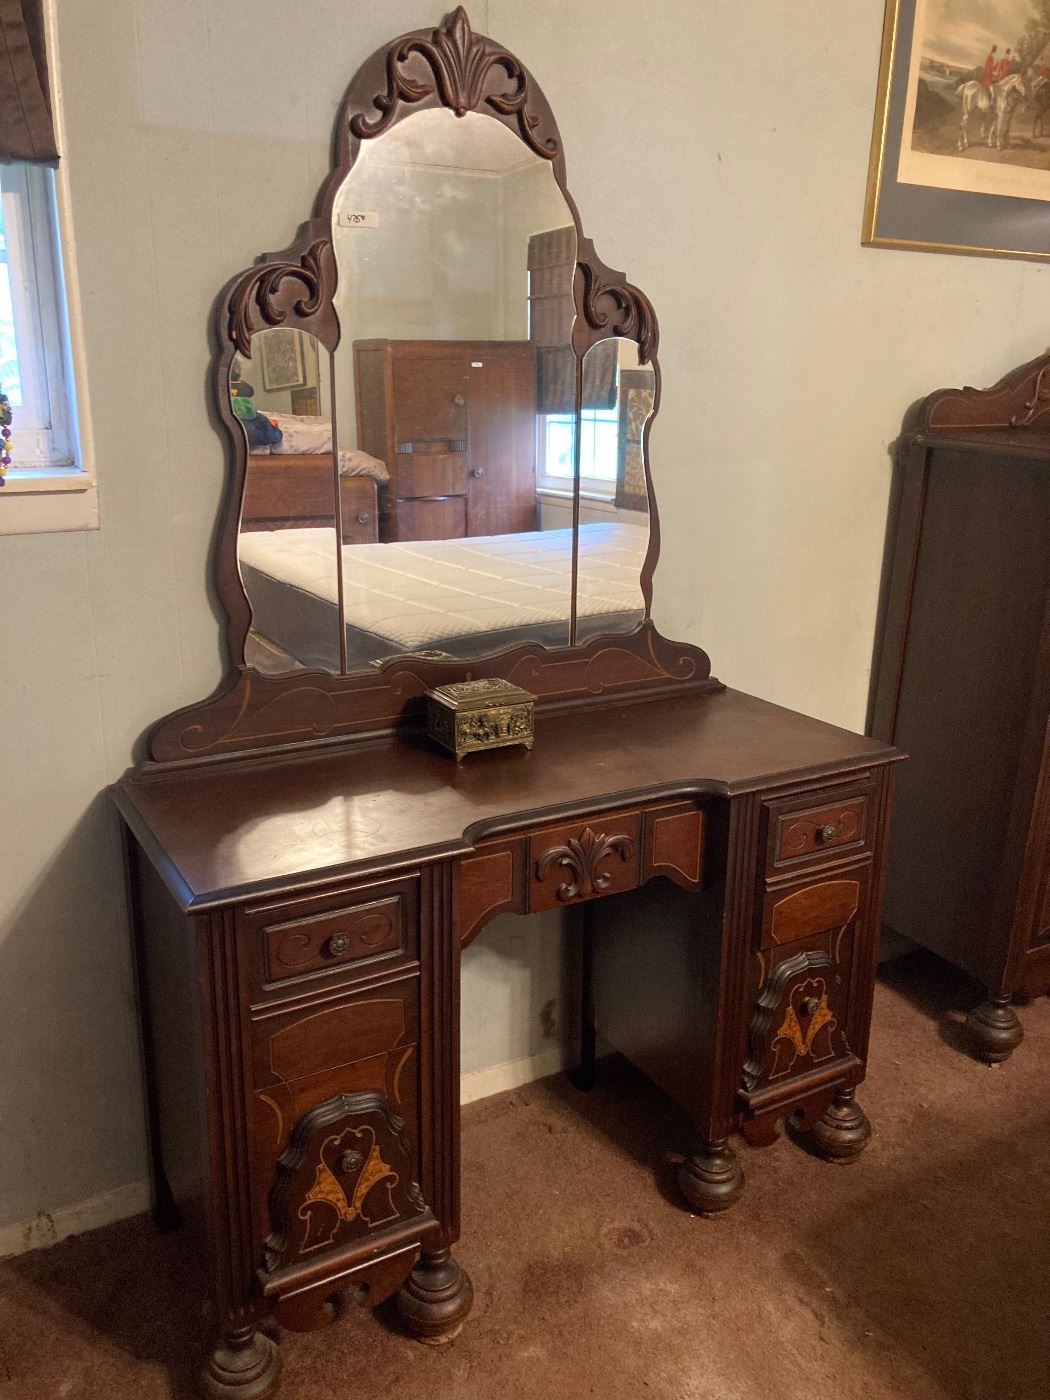 Beautiful inlaid wood Art Deco dressing table
Available to purchase now! Call us
Diane Cox 865-617-0420 or Bill Anderson 615-585-9301